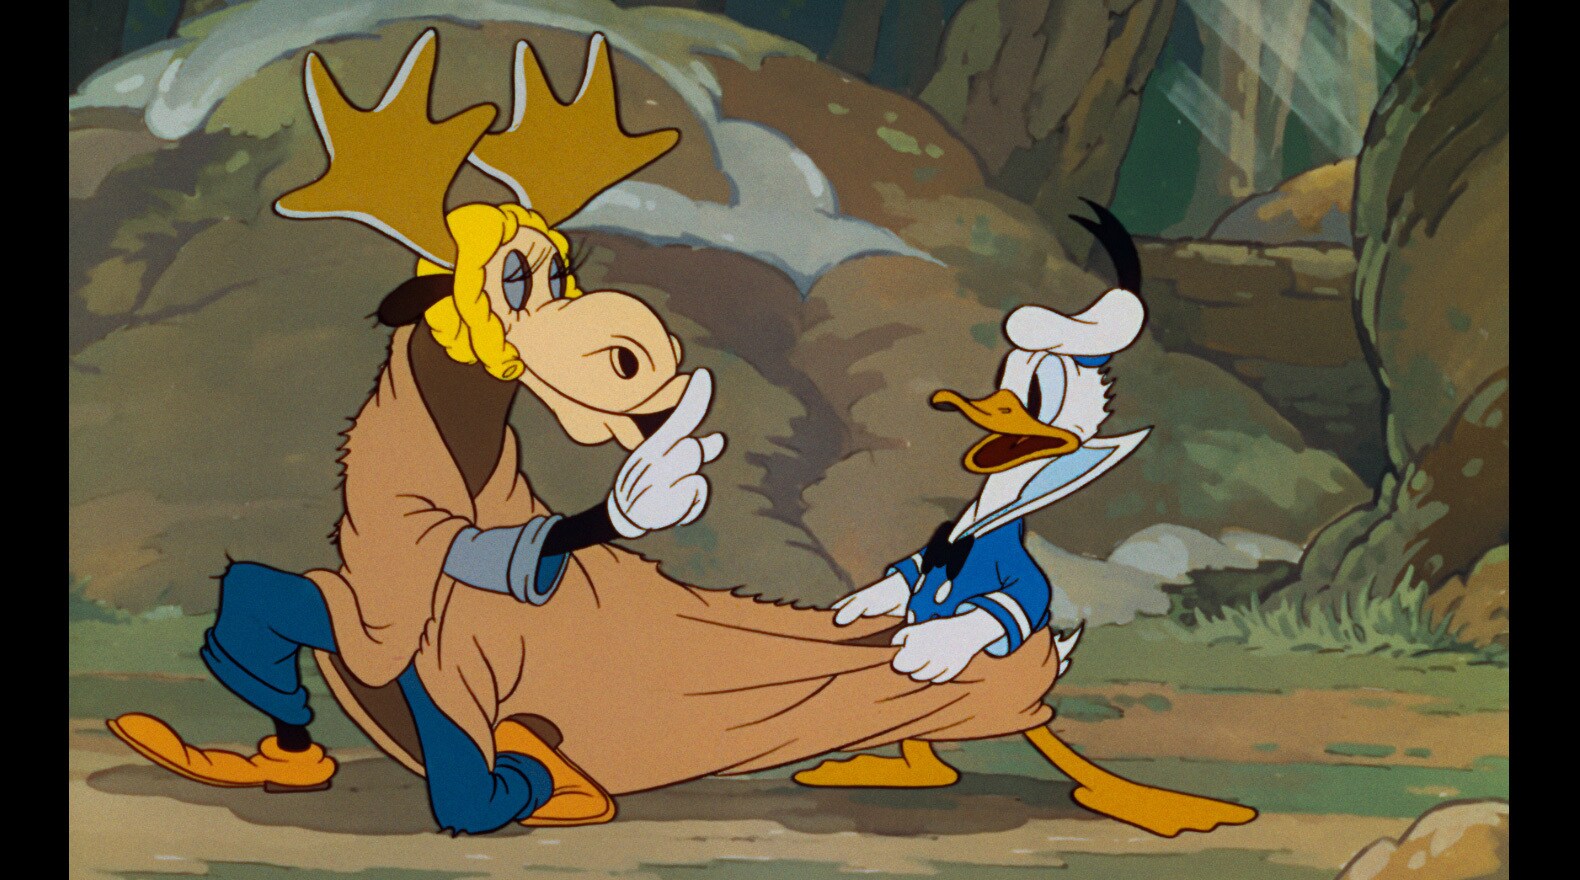 While this may appear like an ordinary moose, it turns out to be Donald and Goofy having a little...